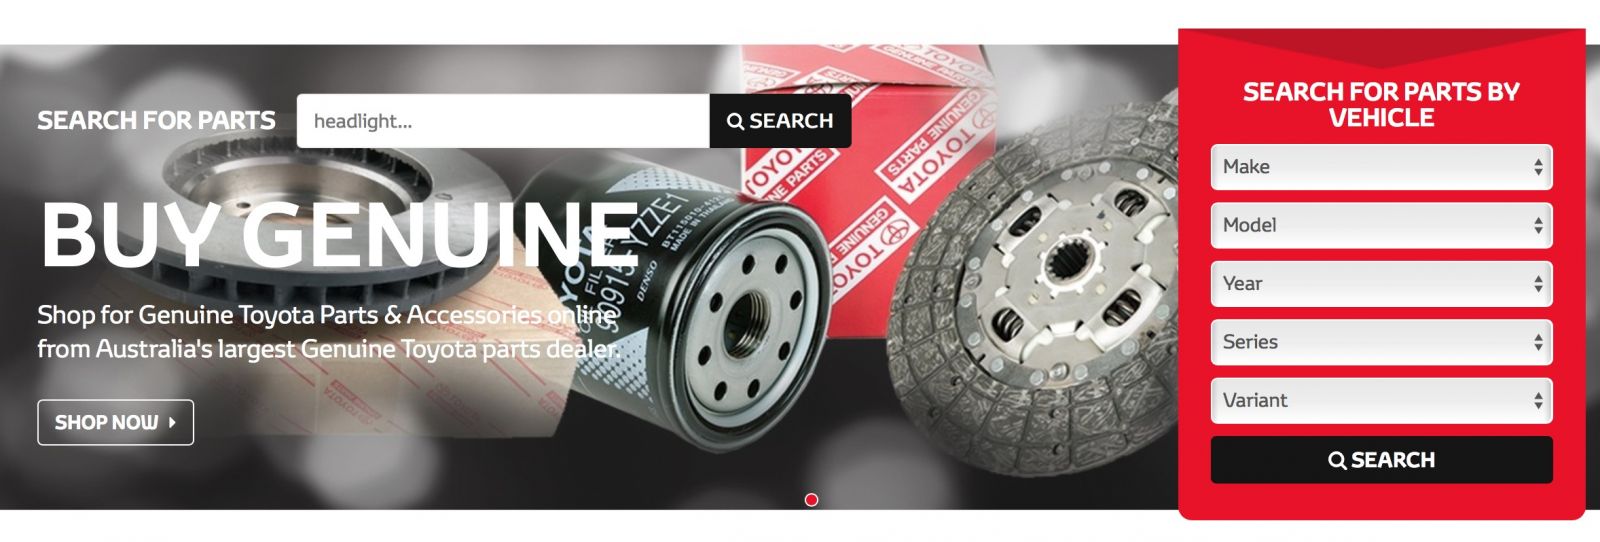 How to search for Parts & Accessories